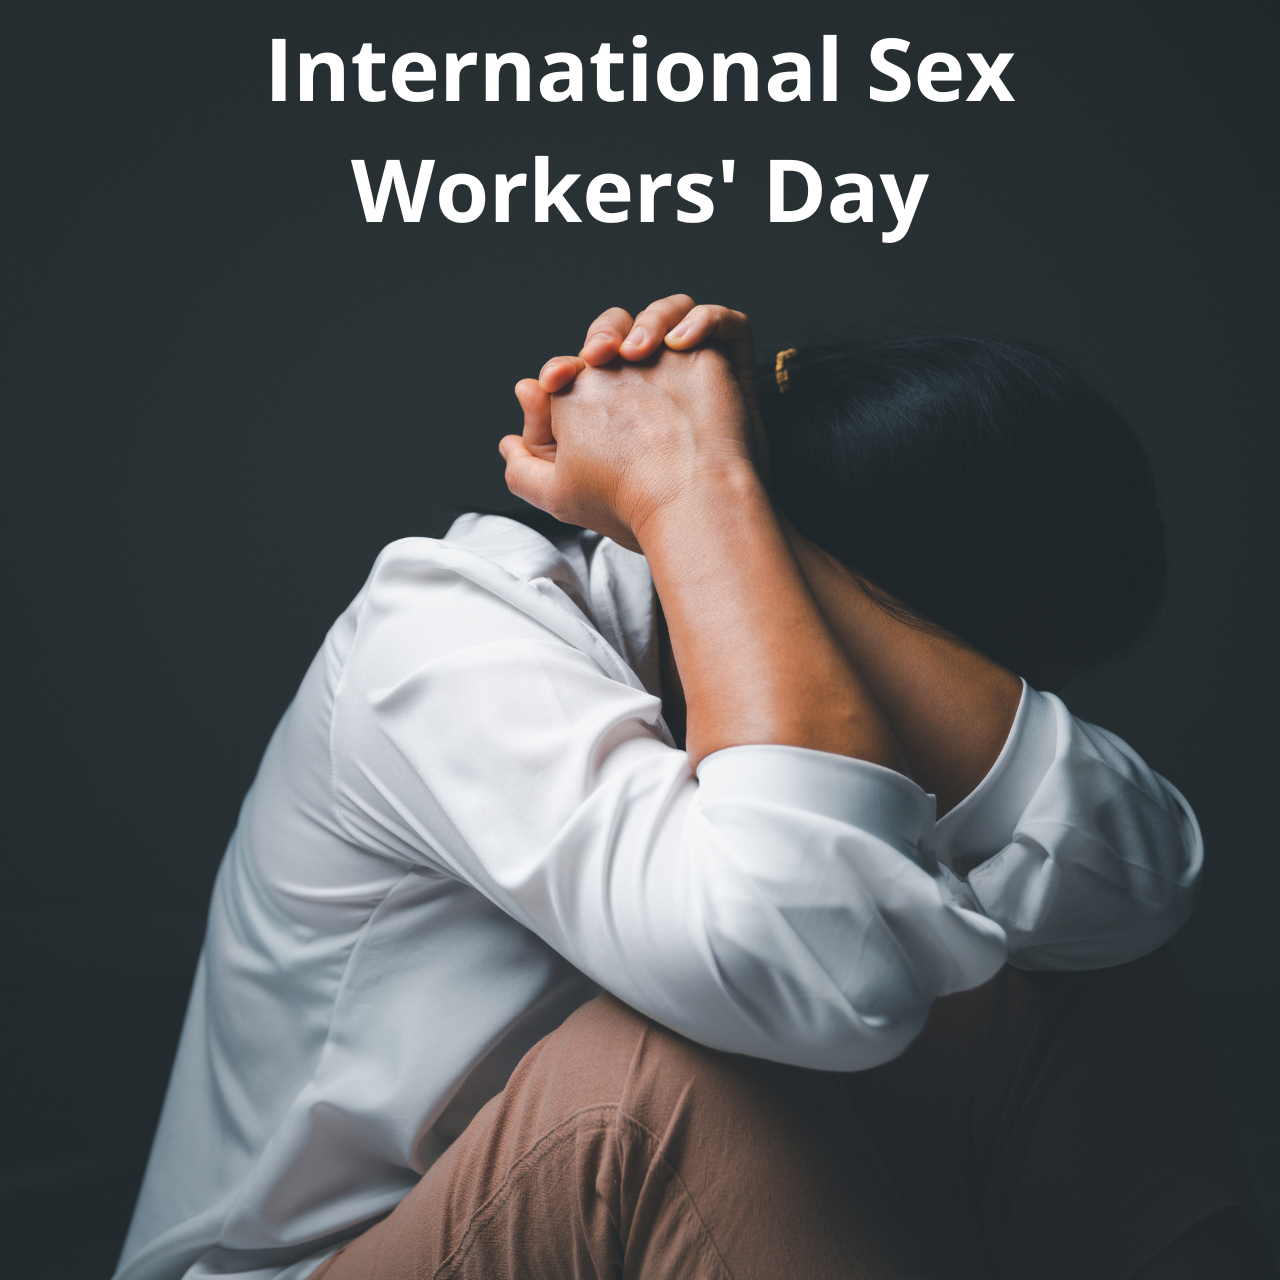 International Sex Workers' Day 2023 Images, Messages, Quotes, Captions, Sayings, Banners, Posters, and Slogans